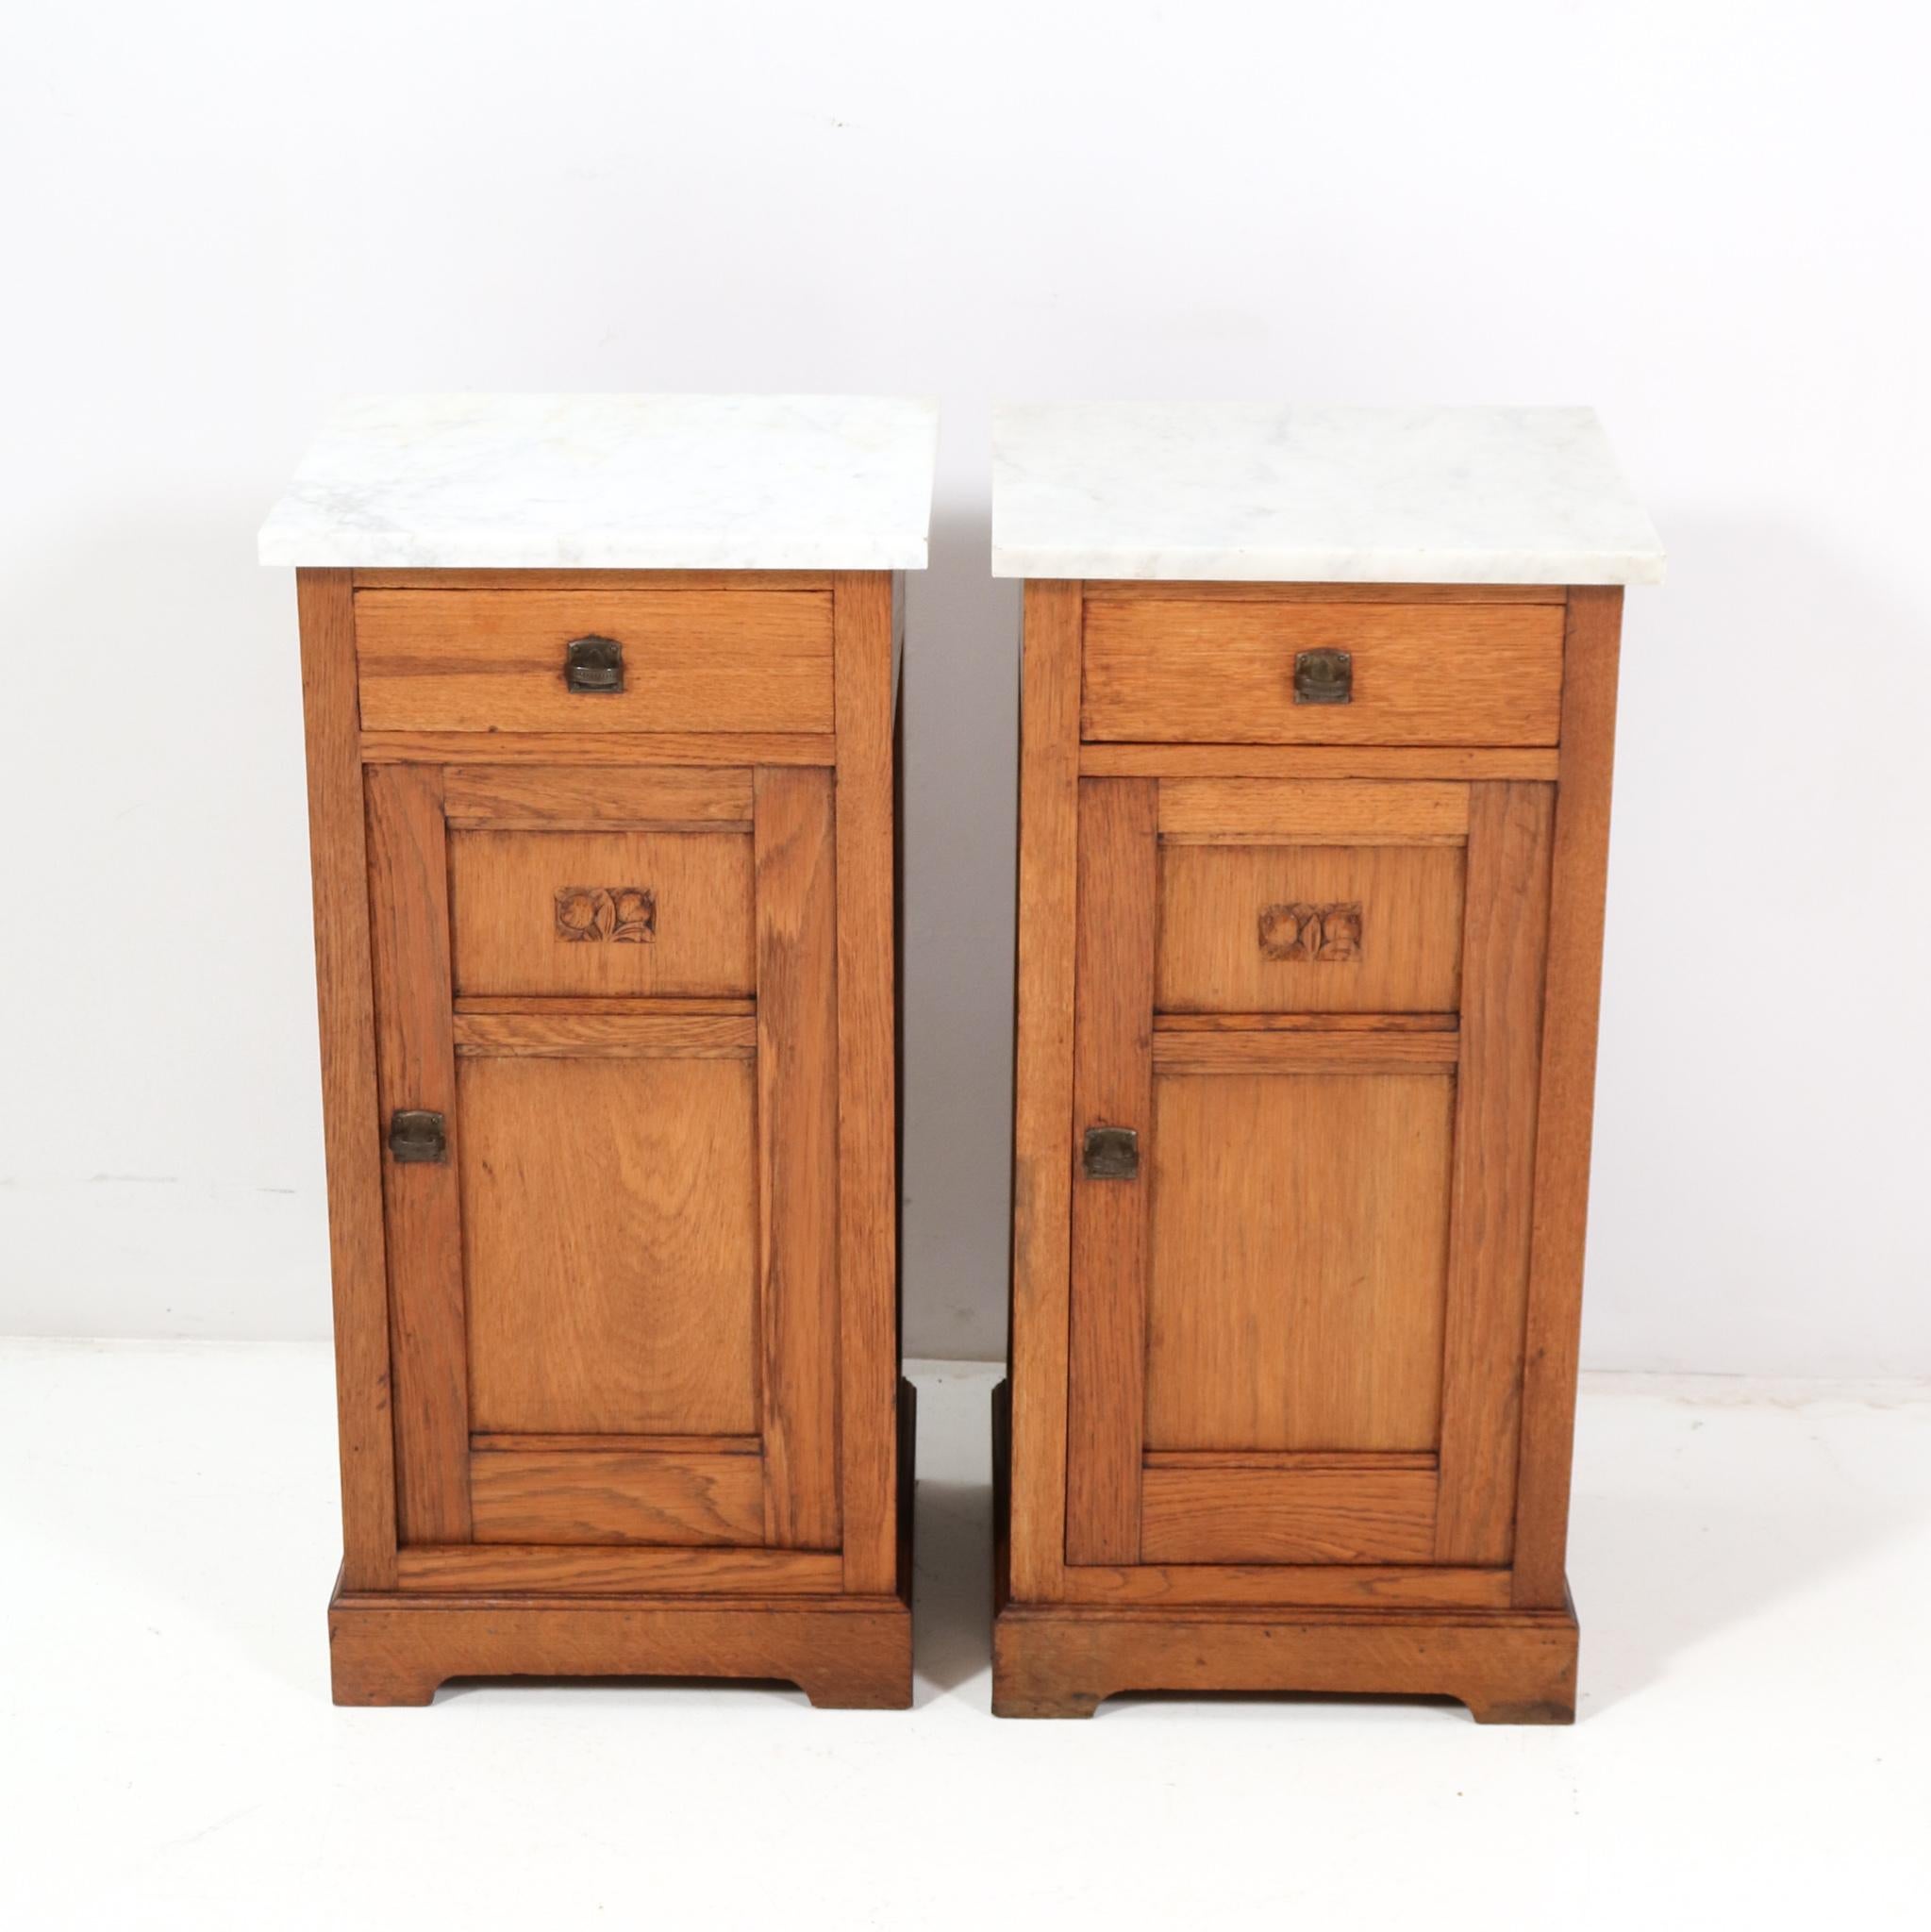 Amazing and rare pair of Art Nouveau Jugendstil nightstands or bedside tables.
Striking Dutch design from the 1900s.
Solid oak with original patinated brass handles on doors and drawers.
Two original marble tops.
This wonderful pair of Art